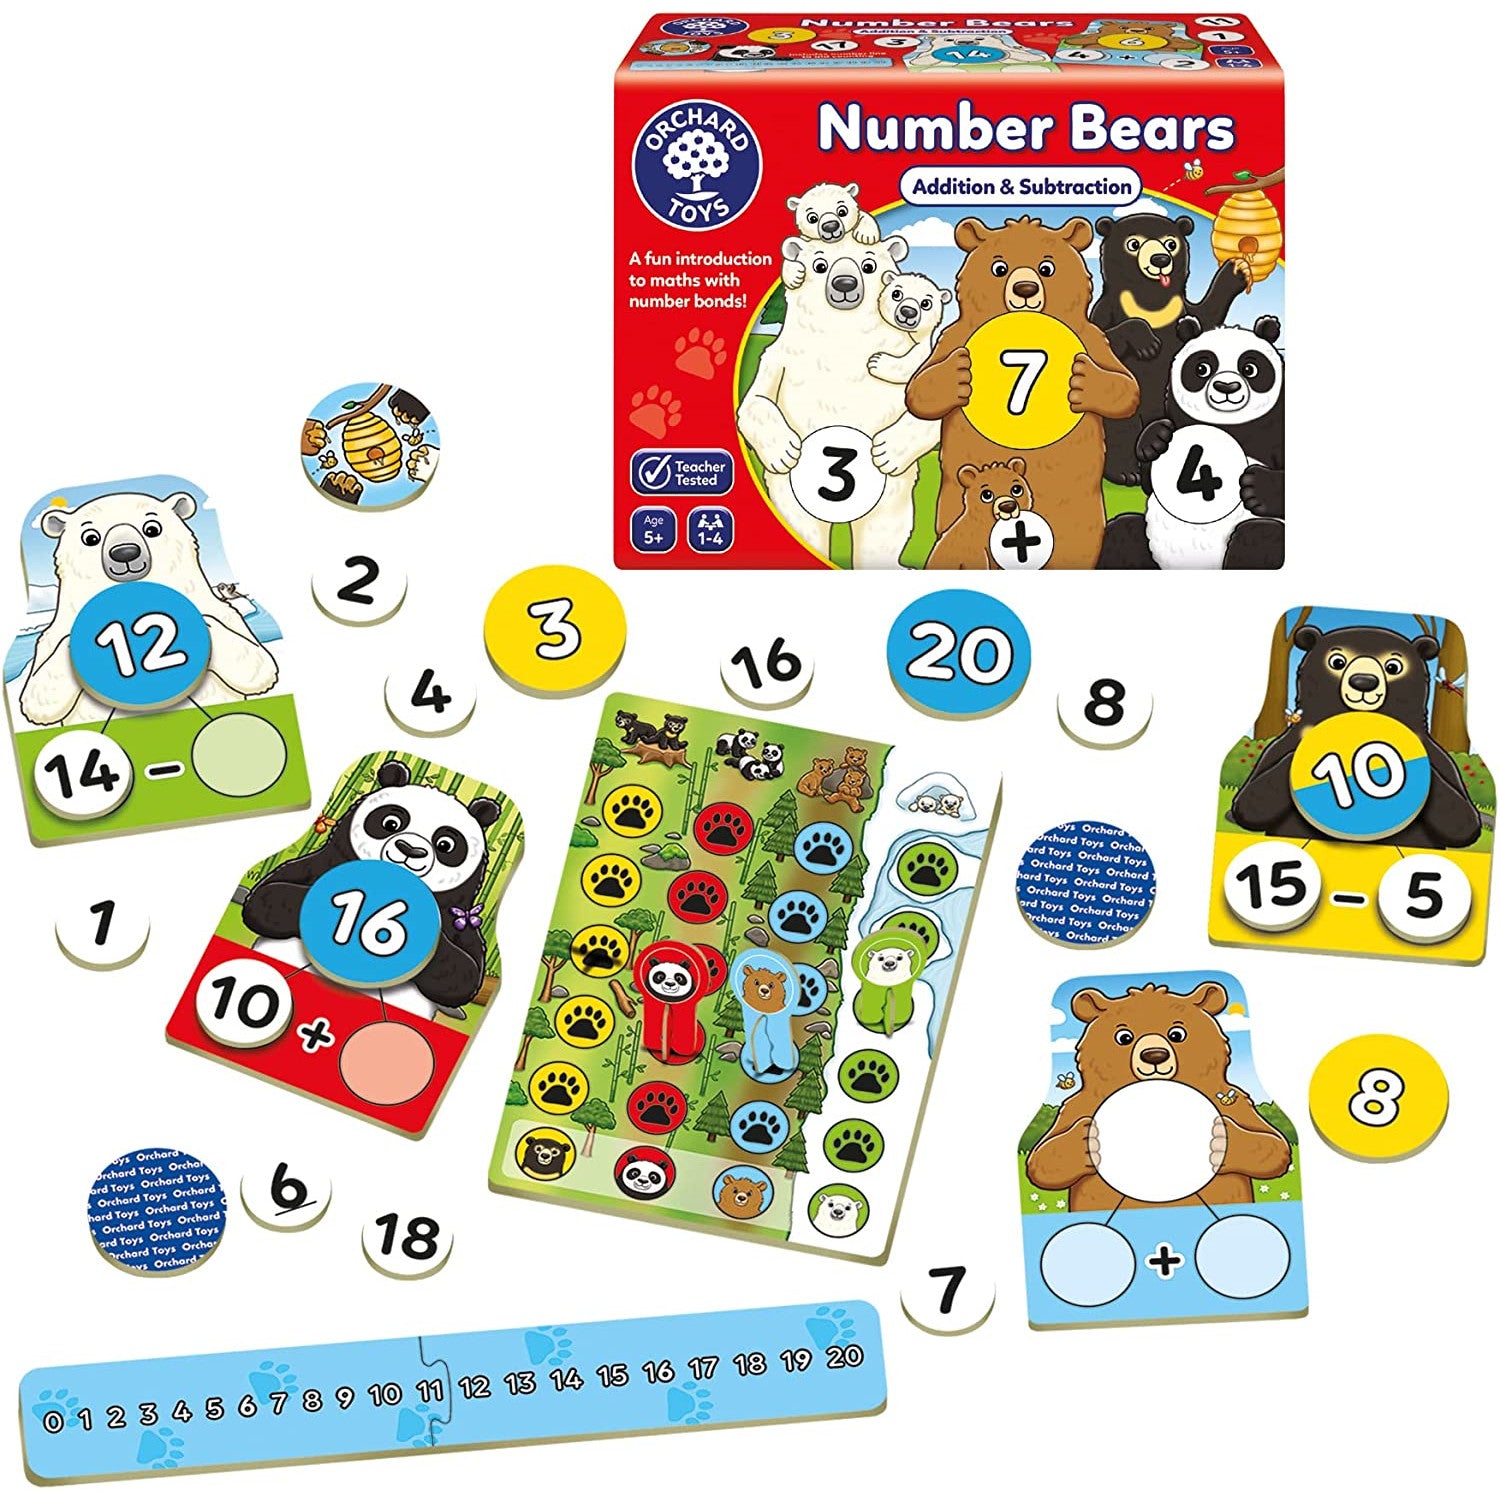 Orchard Toys Number Bears Game 1